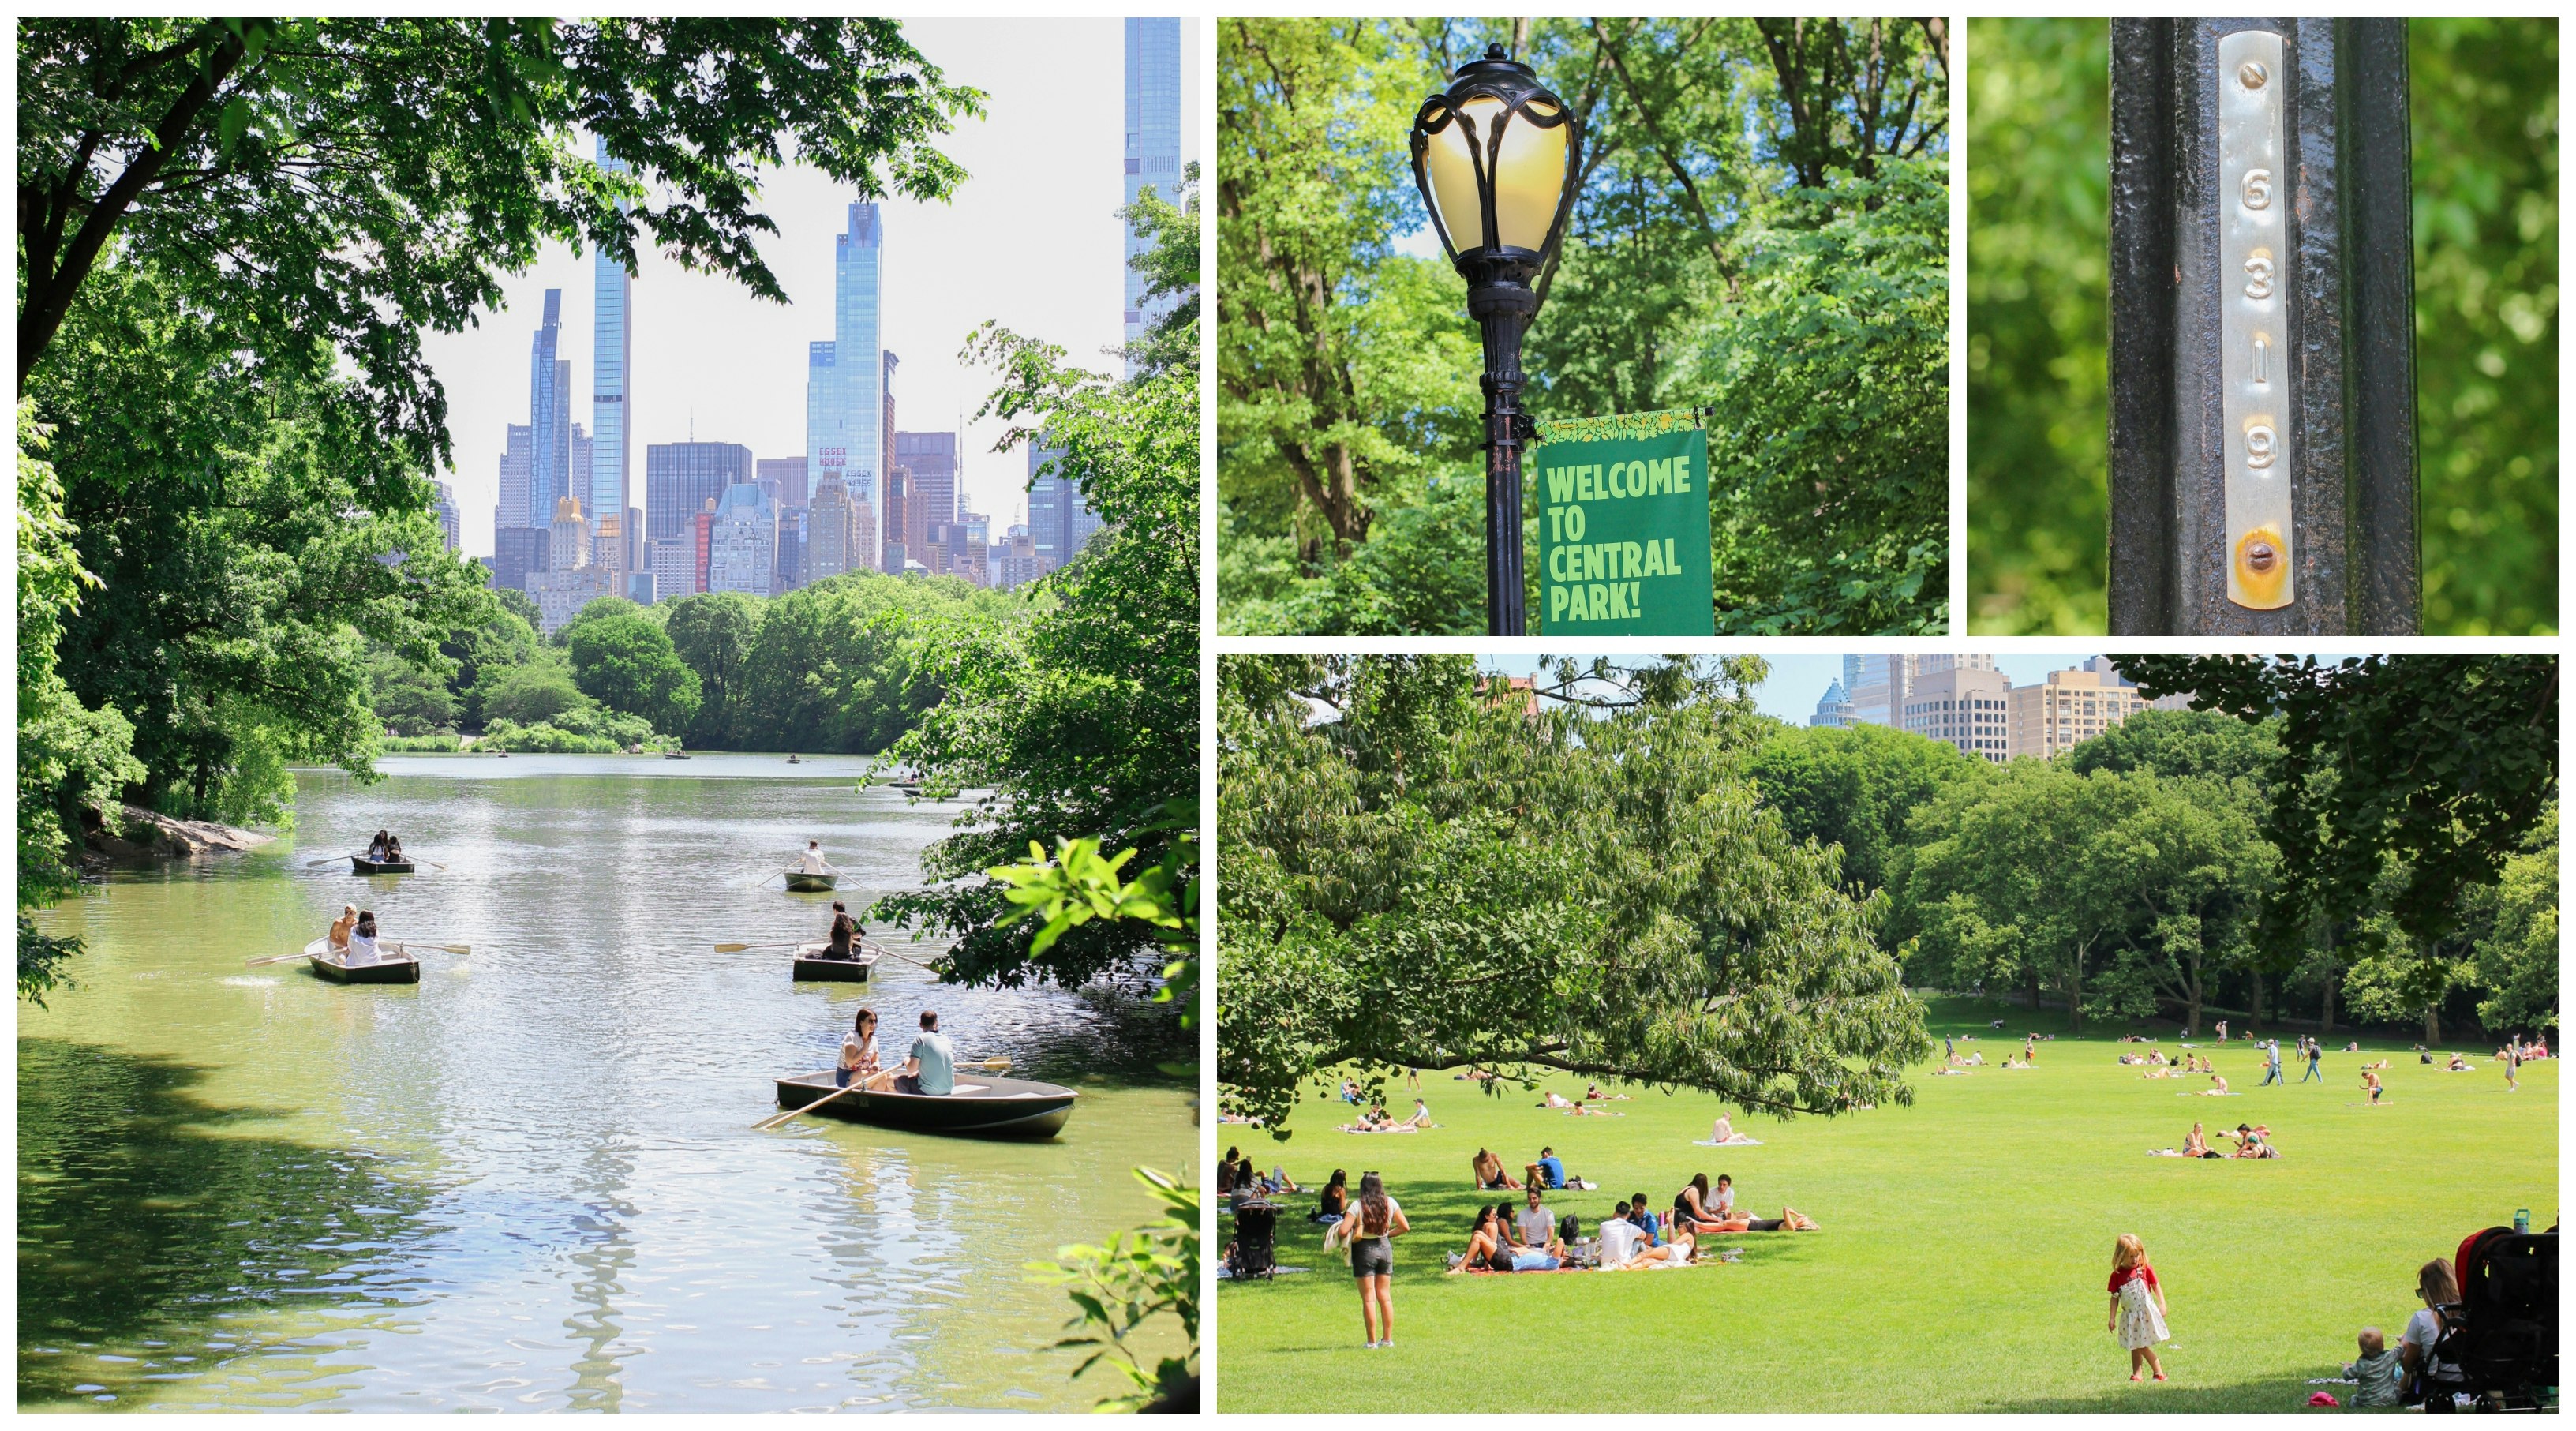 Left: Rowboats on The Lake in Central Park, Top middle: a welcome sign in Central Park Top, right: a number lamp post in Central Park, Bottom right: landscape of Sheep Meadow 